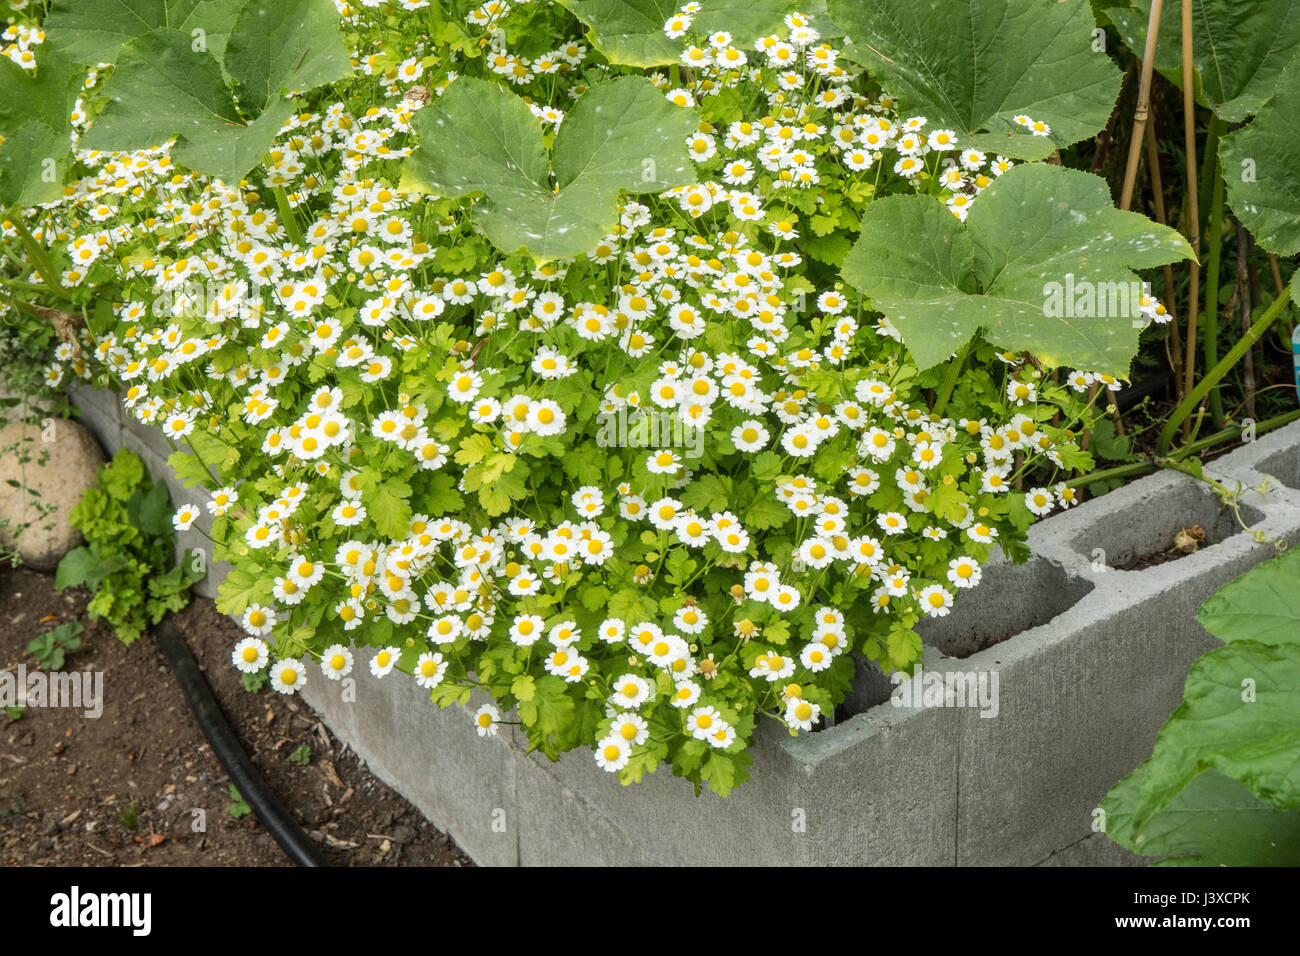 Feverfew (or Featherfoil, Bachelor's buttons, Chrysanthemum Parthenium, or Tanacetum Parthenium) flowers growing among squash plants in a raised bed g Stock Photo